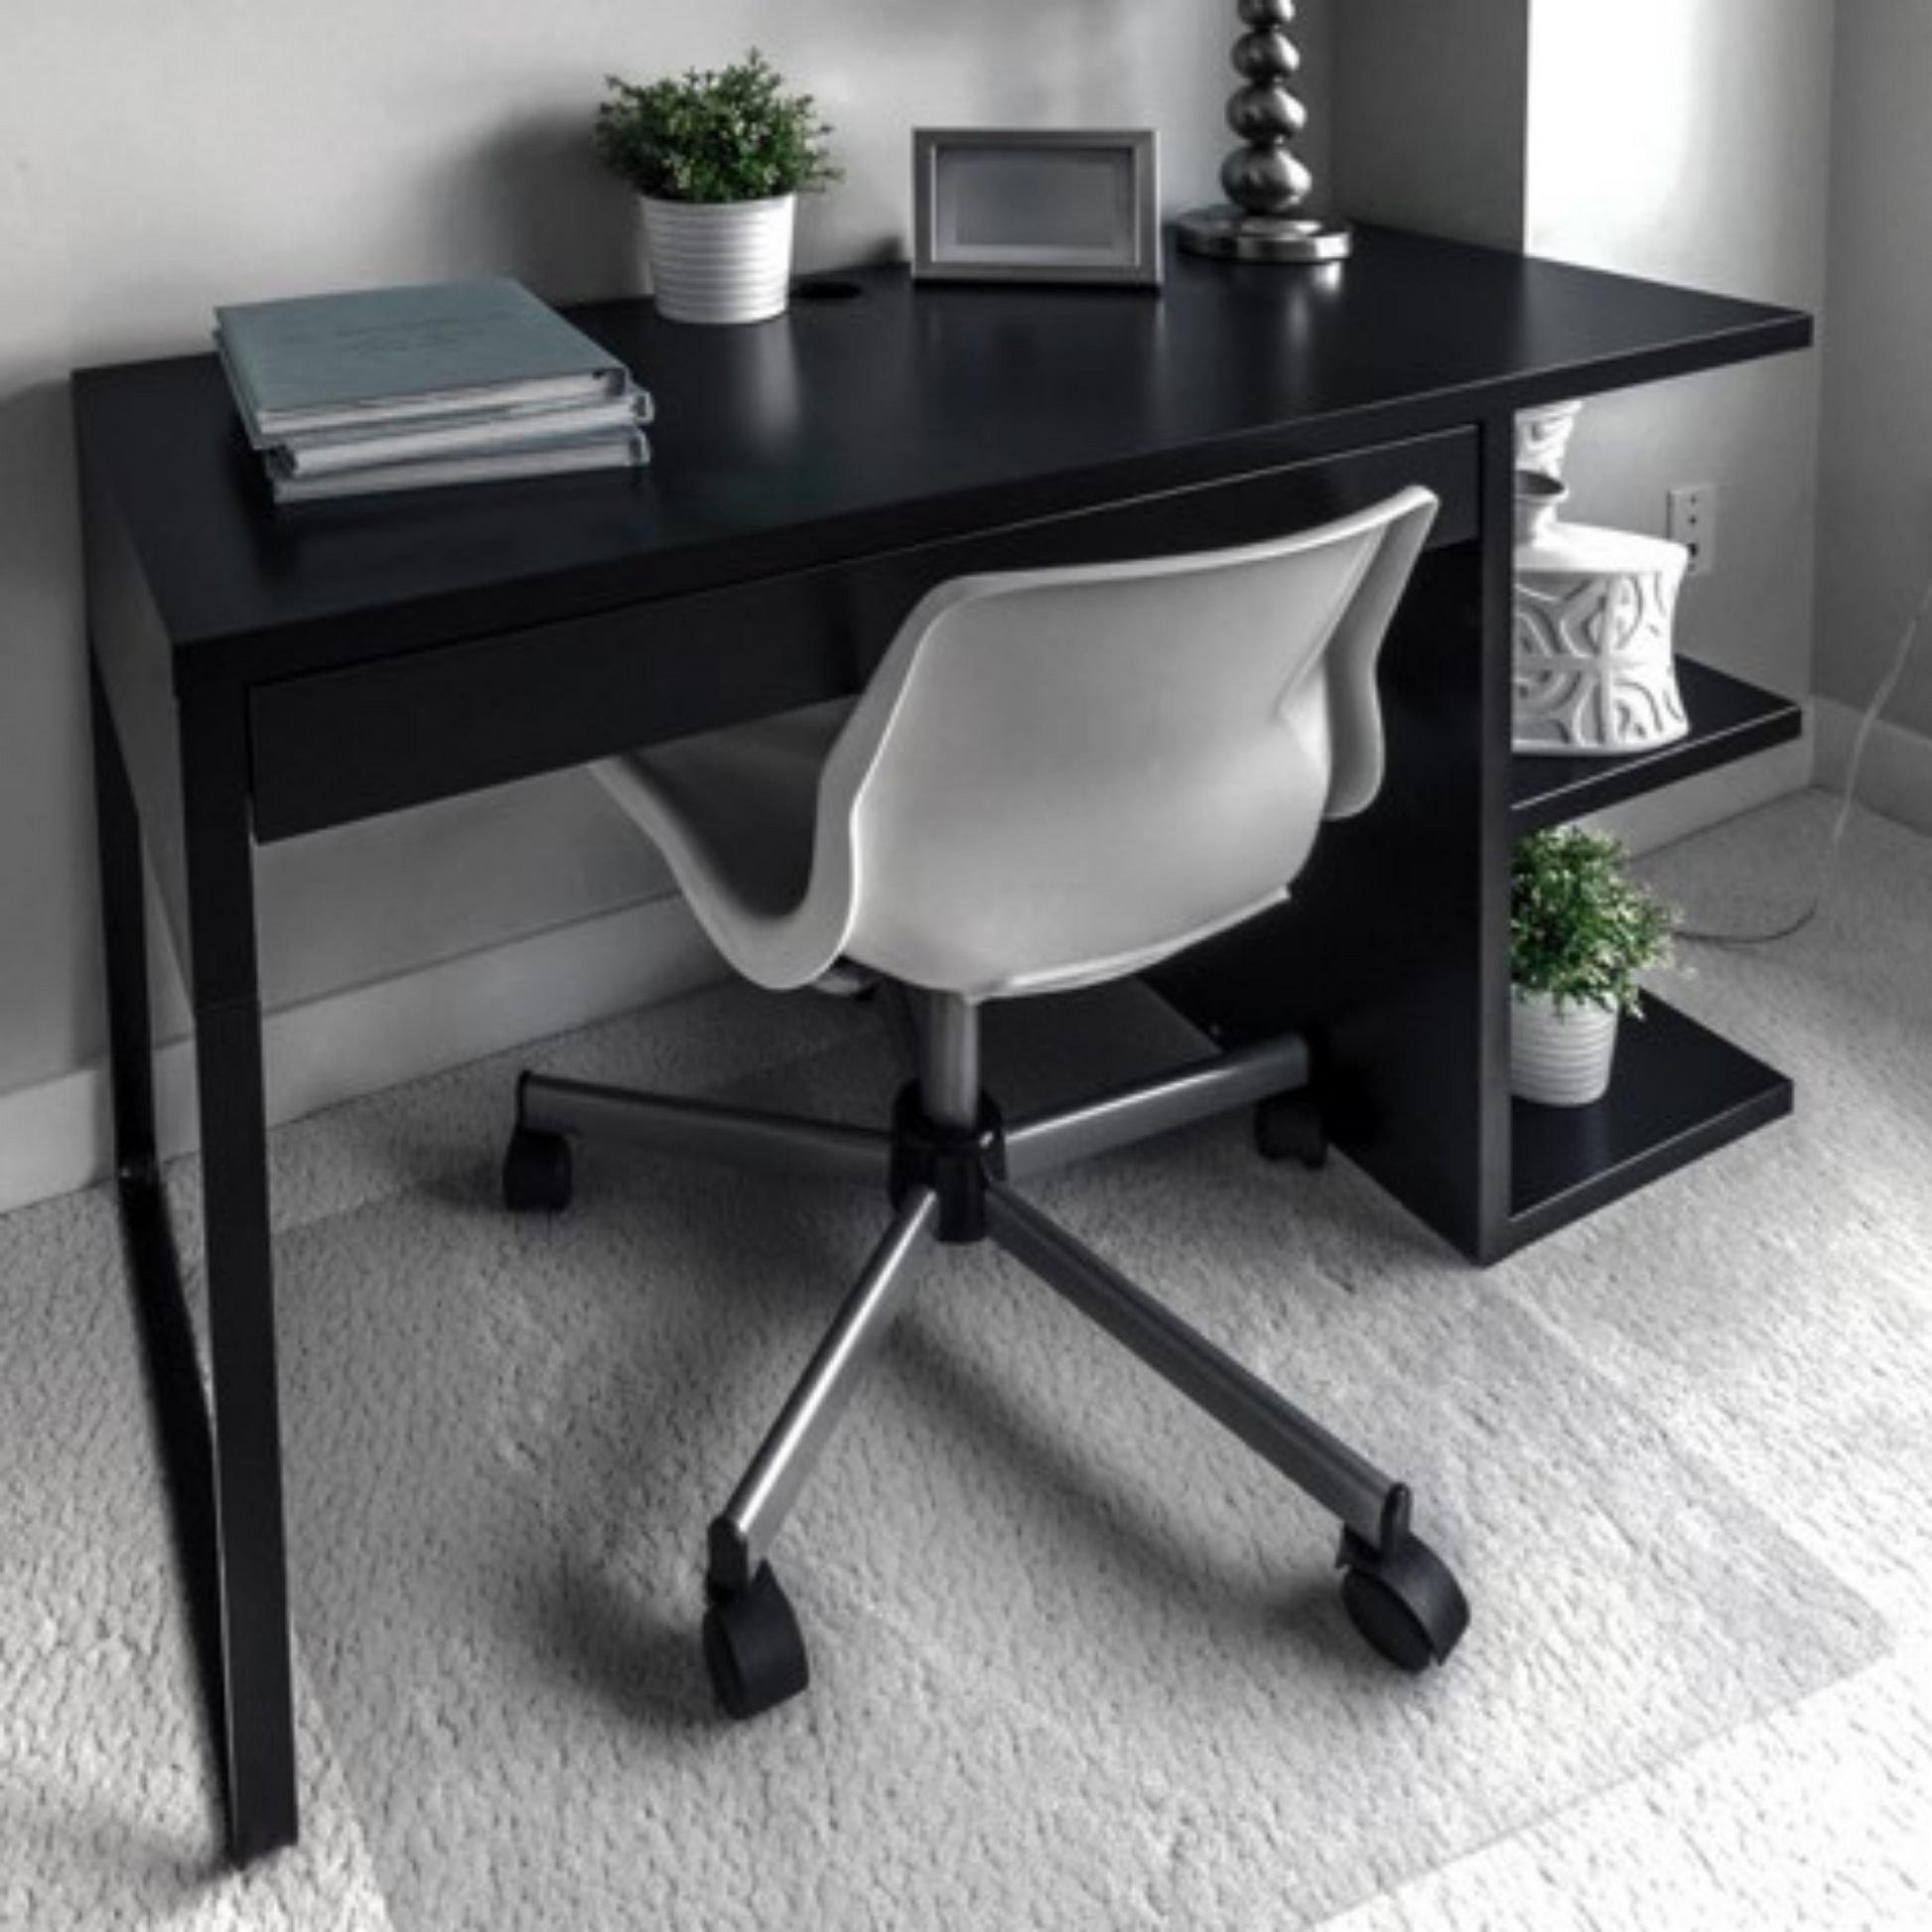 A contemporary home office setup with a black desk and a white modern office chair on a light carpeted floor, with a chair mat protecting the carpet from indents caused by the chair. The desk is adorned with neatly stacked books, a potted plant, and decorative items, creating a clean and stylish workspace.